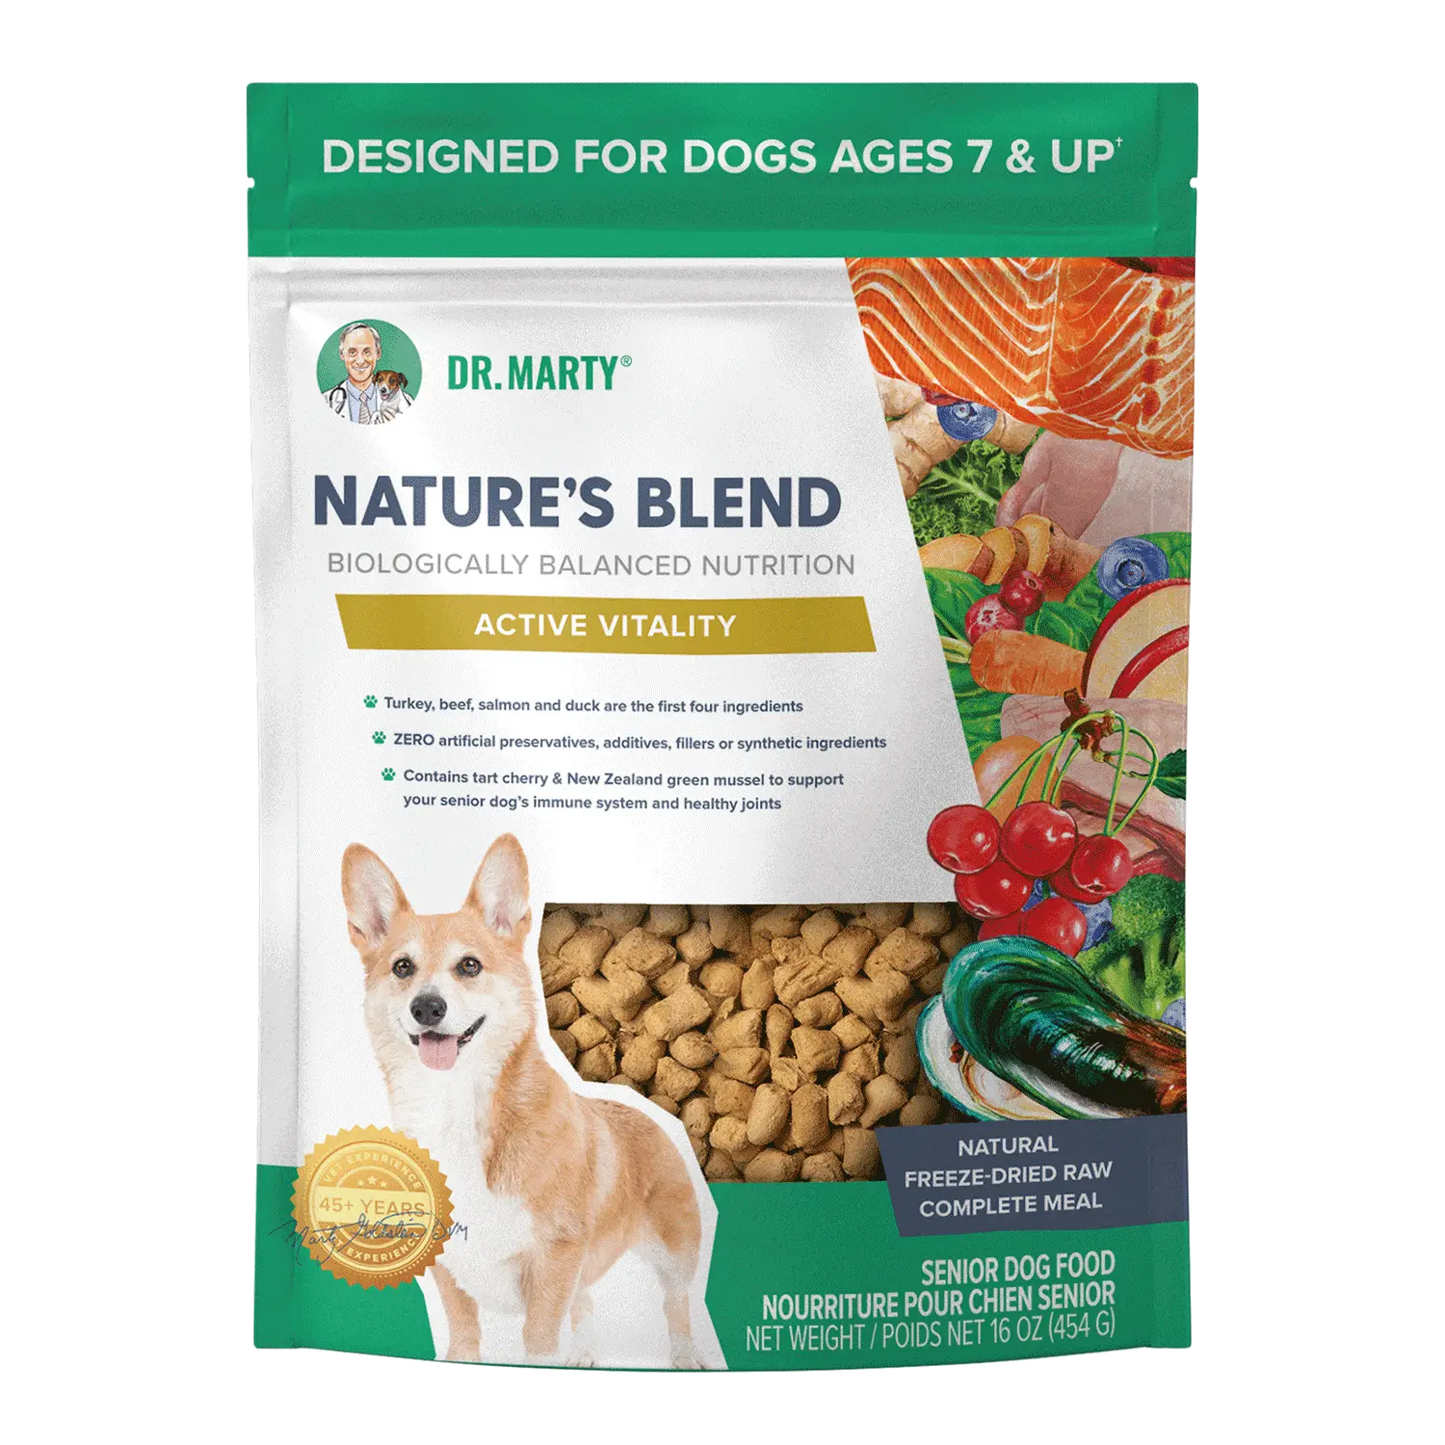 Dr. Marty Nature's Blend for Active Vitality Seniors Freeze Dried Raw Dog Food Dr. Marty